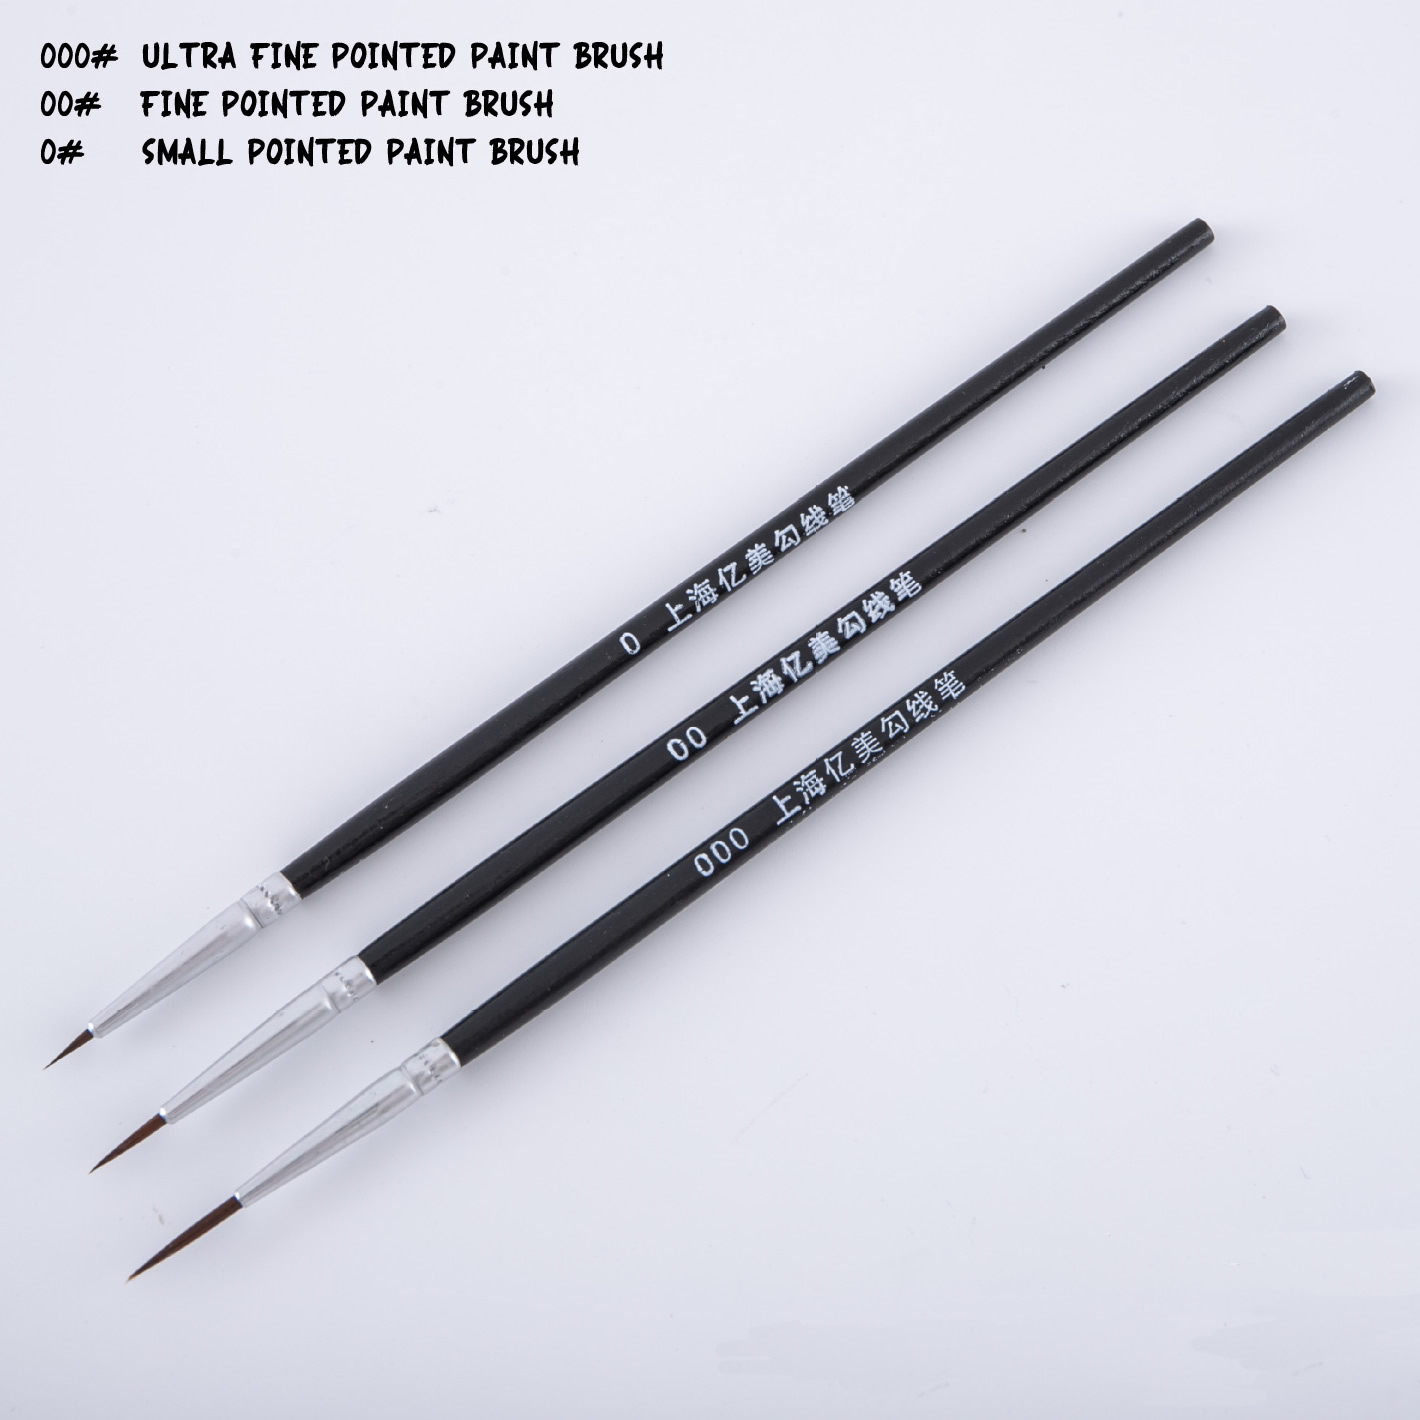 Ultra Fine, Fine, Small 3 in 1 Pointed Paint Brush 0# 00# 000#